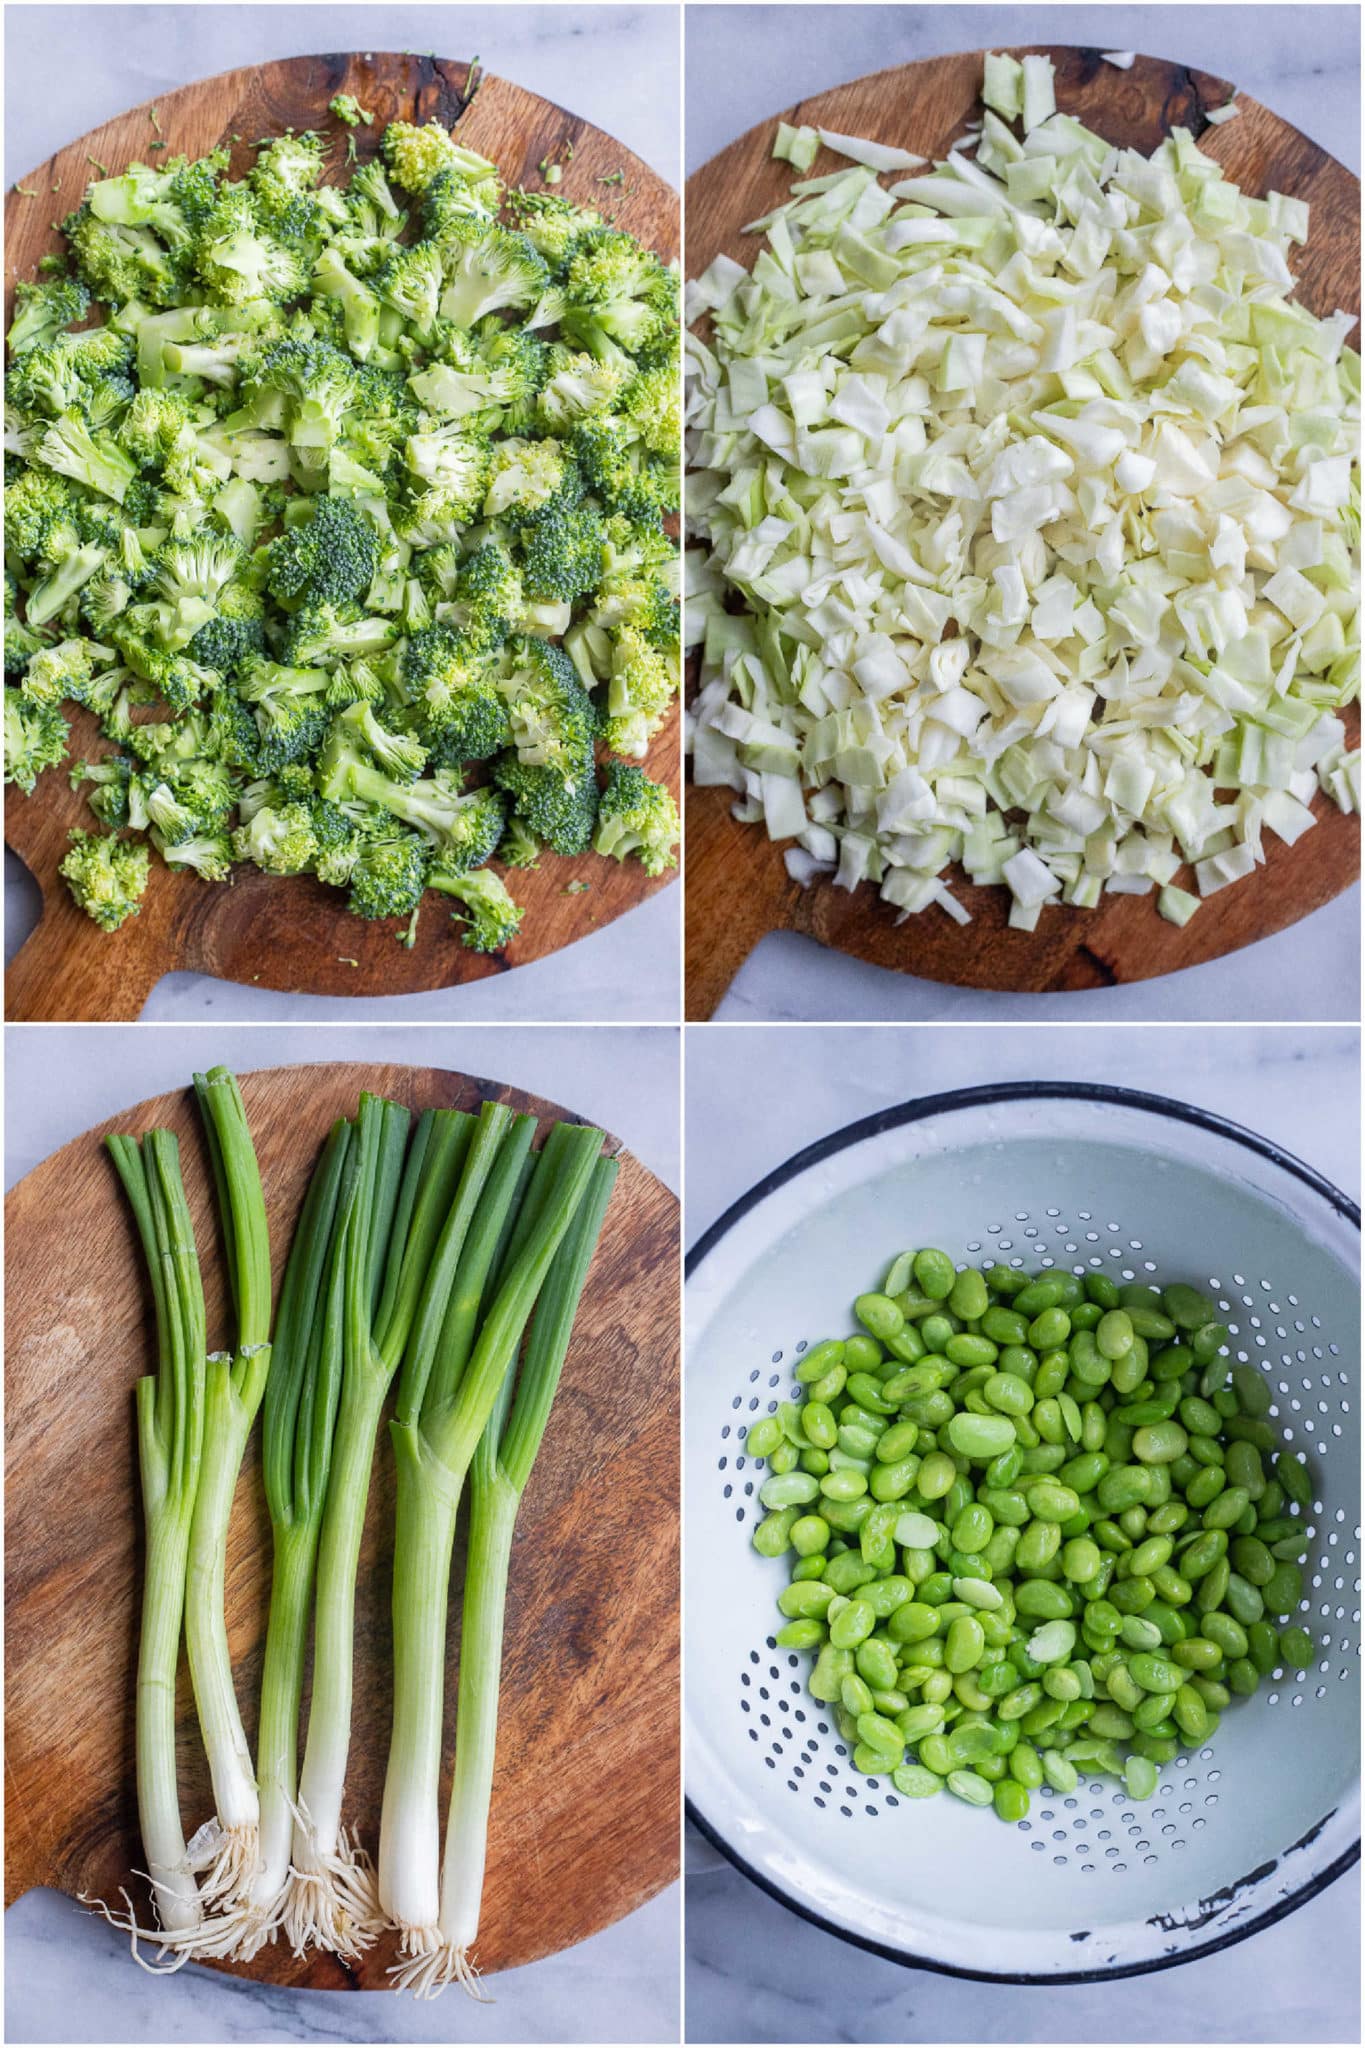 showing how to make green veggie stir fry with broccoli, cabbage, green onion and edamame